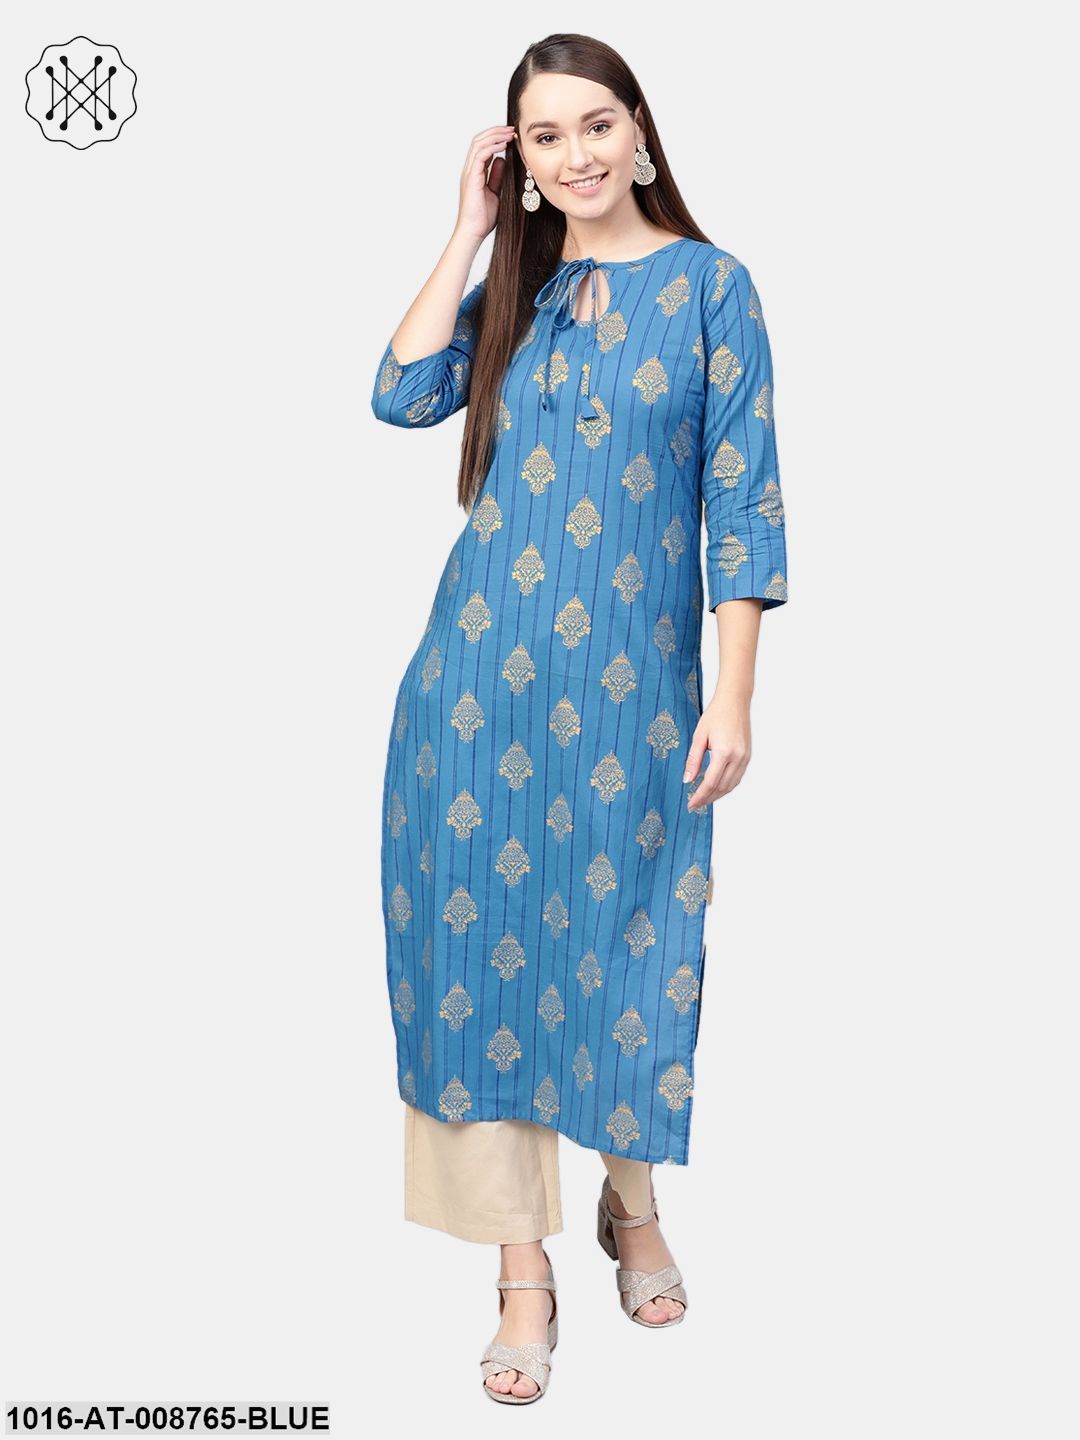 Cobalt blue Gold printed Striaght kurta with Keyhole neck & 3/4 sleeves